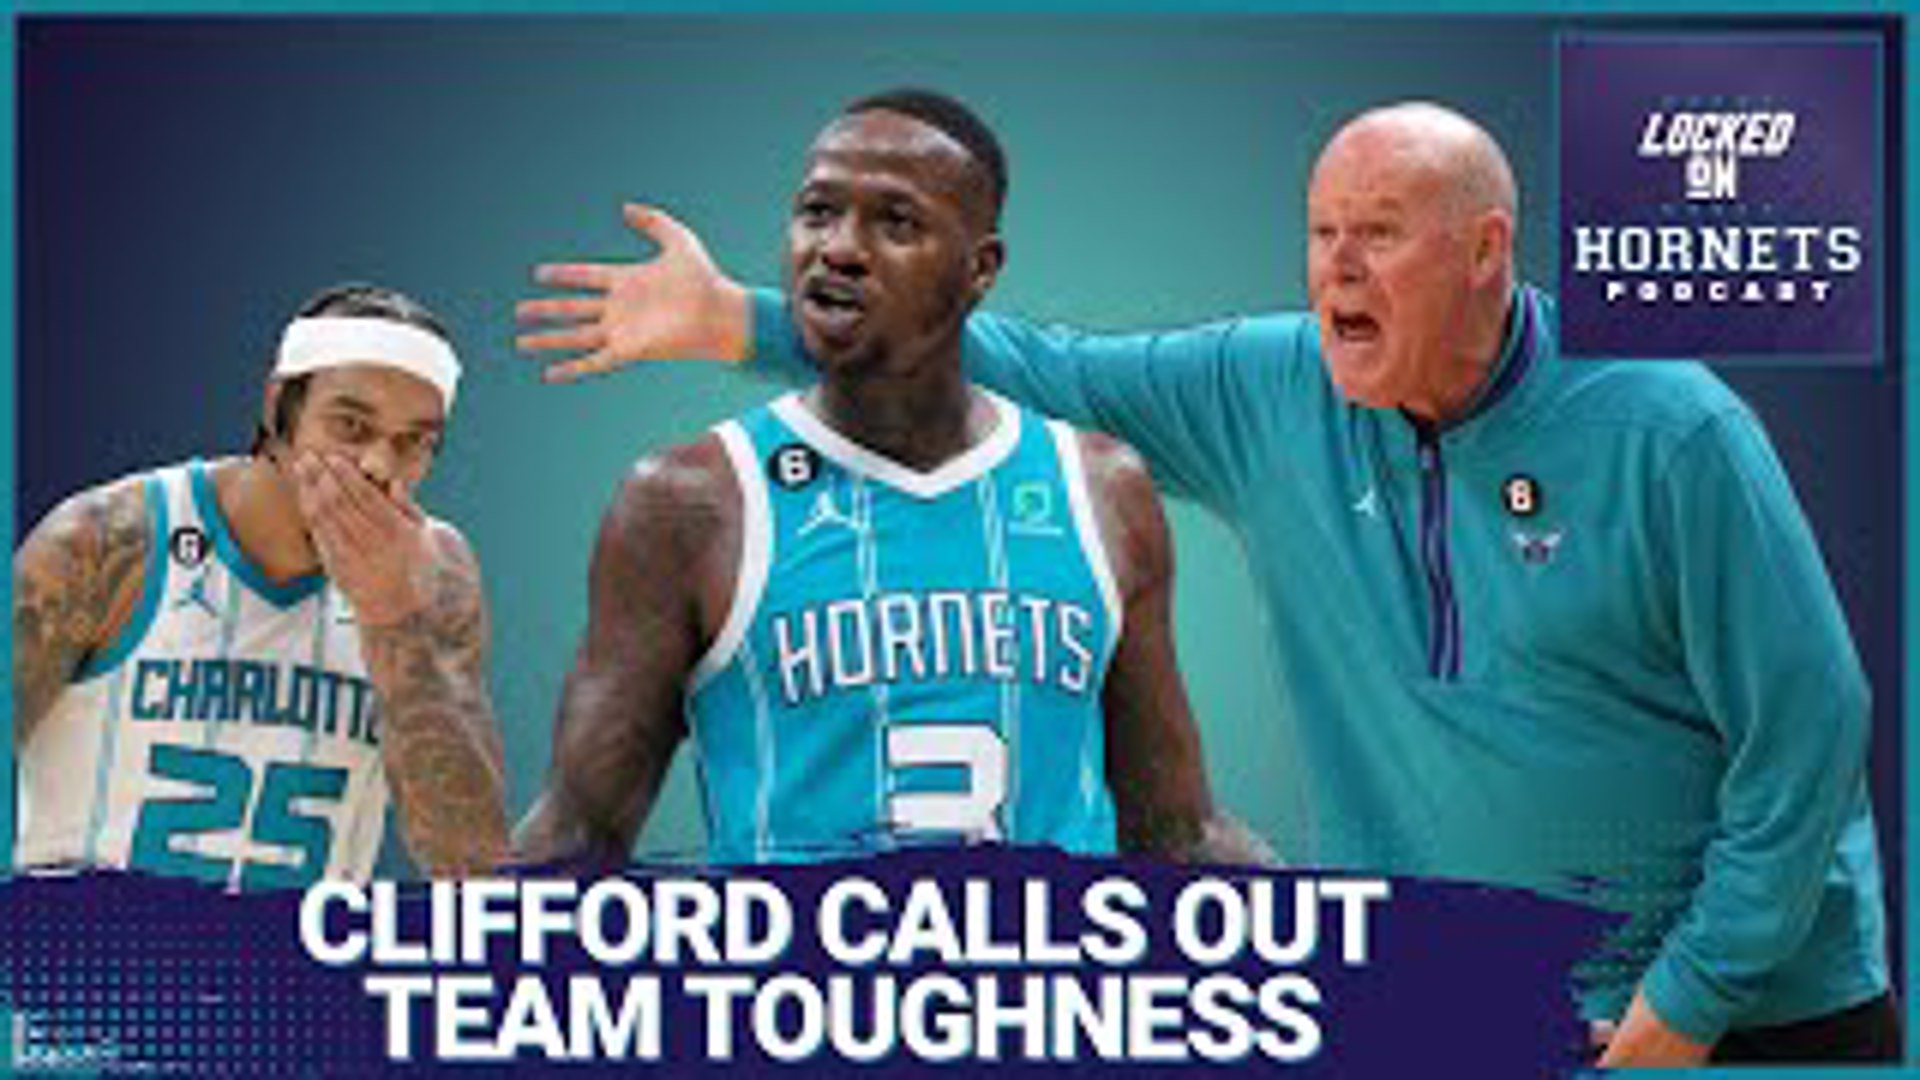 The Hornets went 0-2 over the weekend suffering close losses to the Cavs and Wizards. Why are they losing all the close matchups? That and more on Locked on Hornets